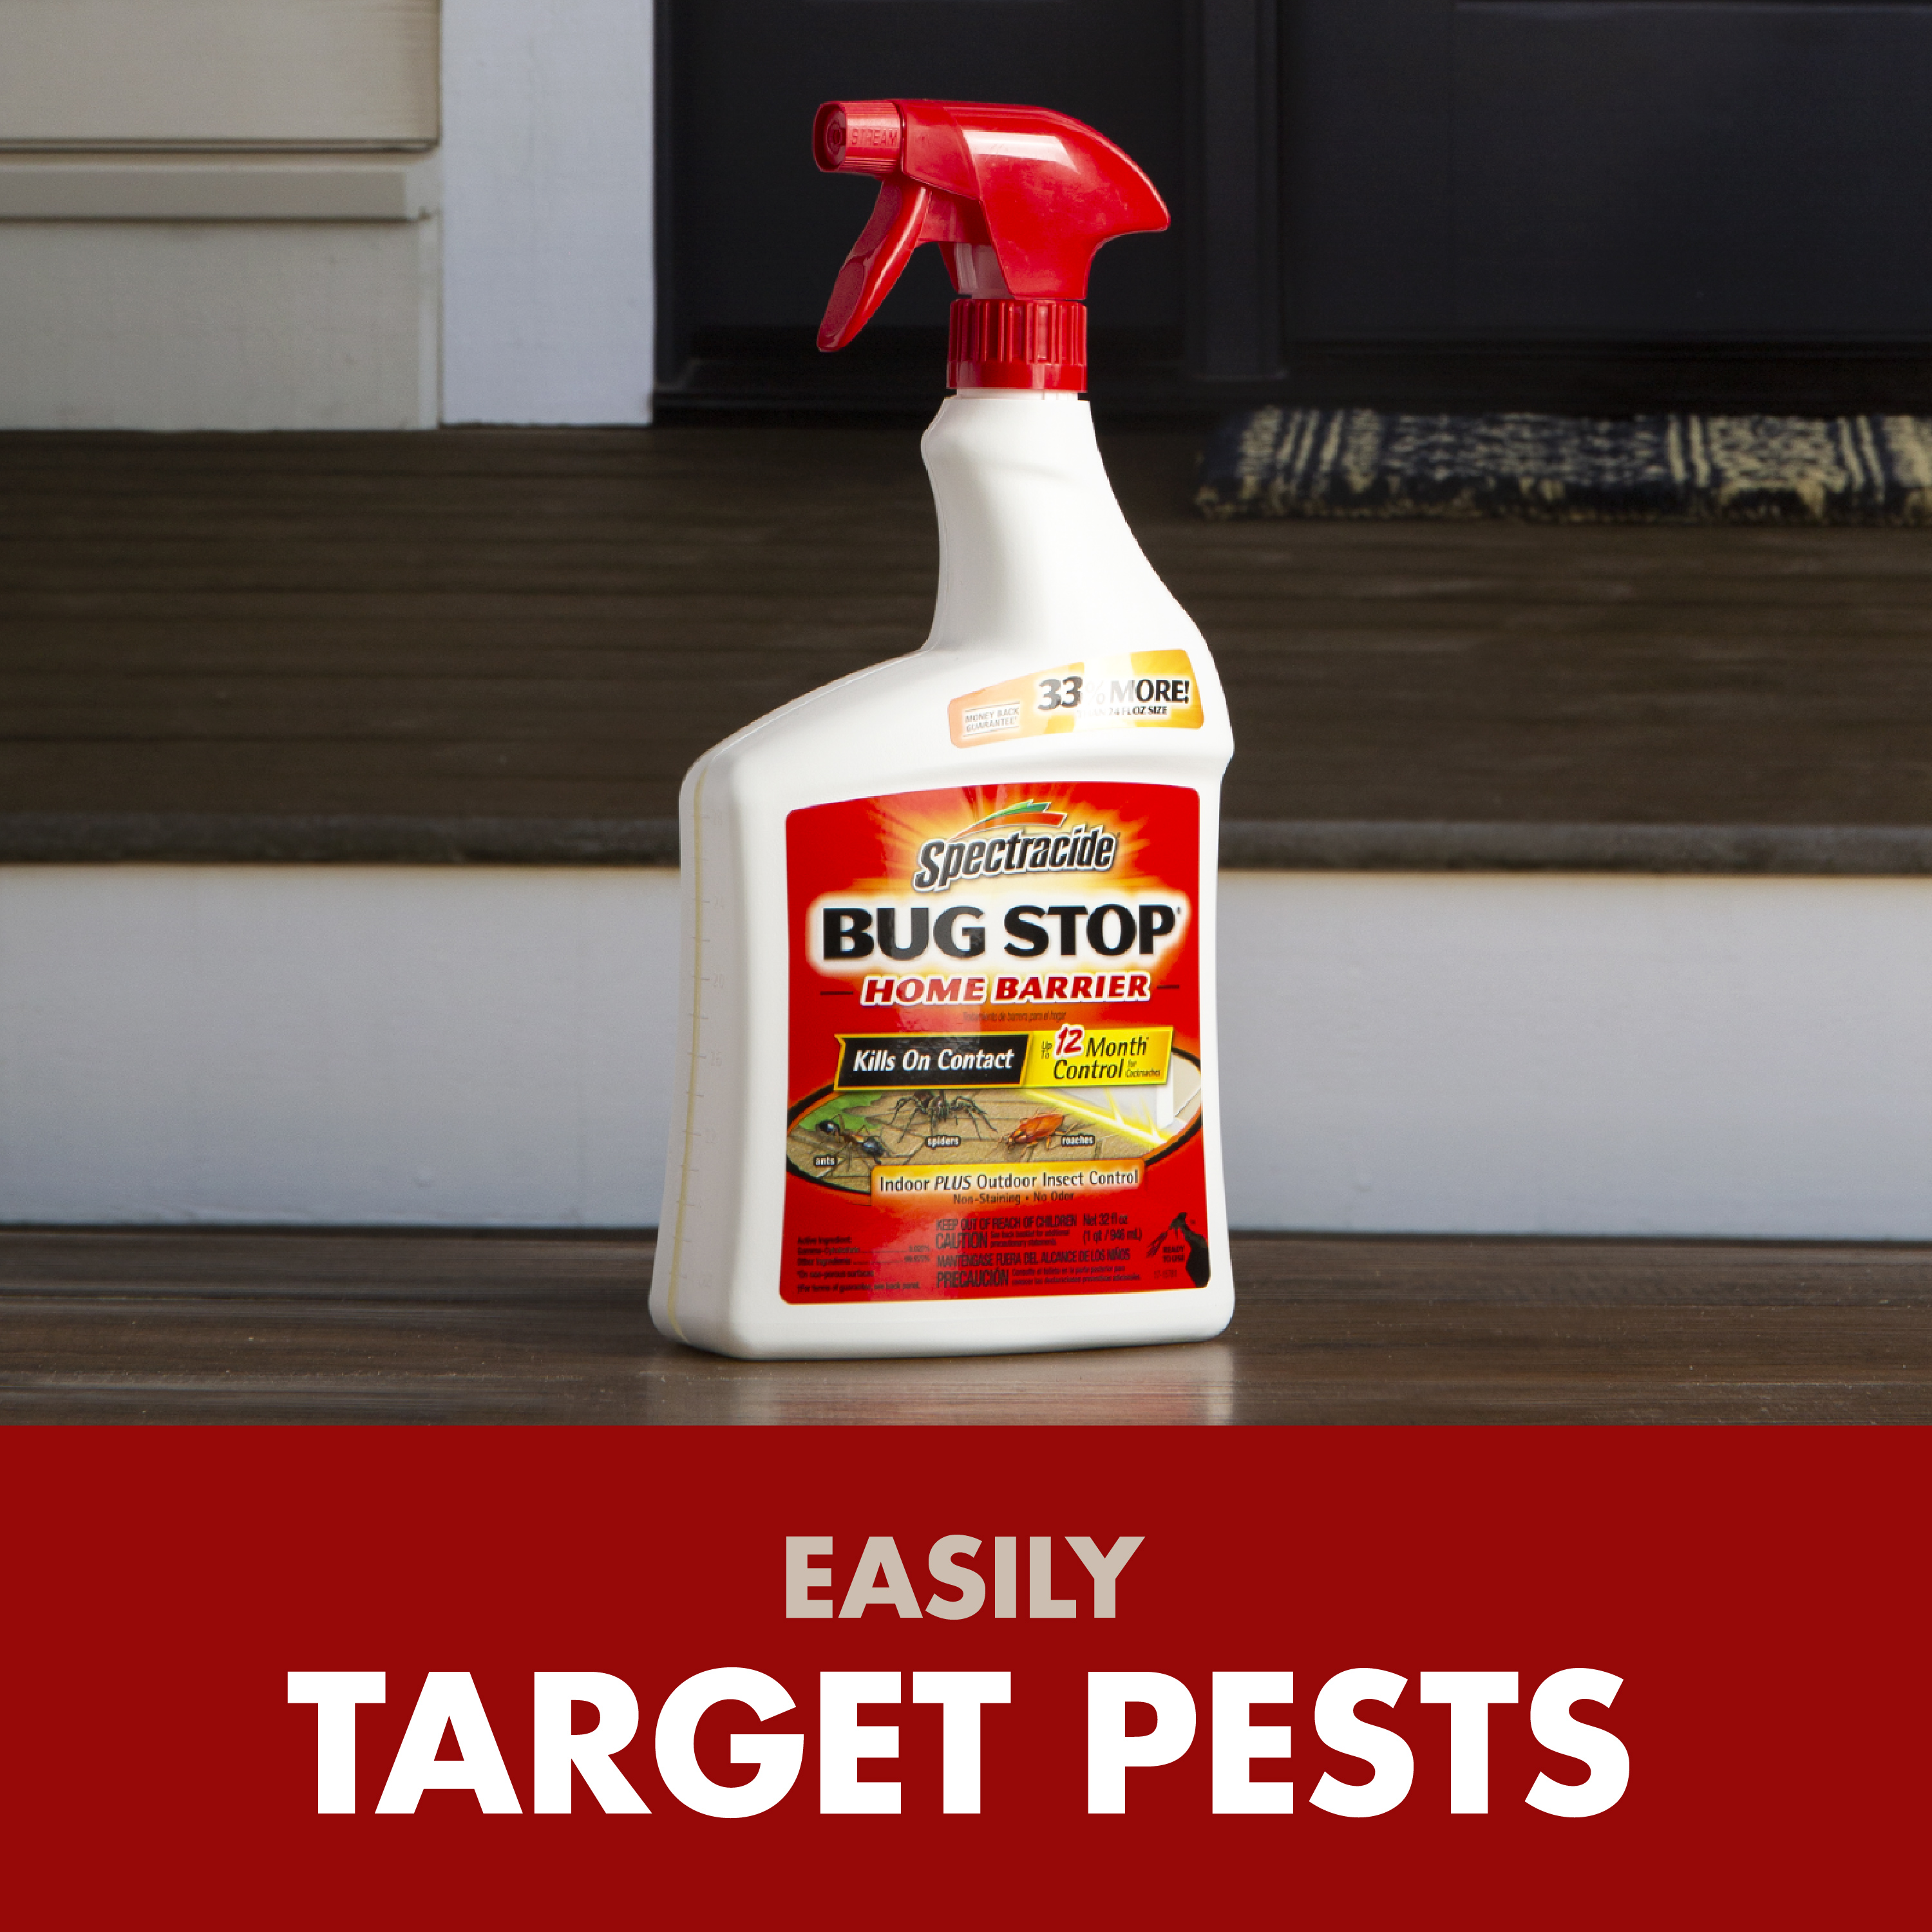 Spectracide Bug Stop Home Barrier, Kills Ants, Roaches, Spiders, Insect Control, 32 fl oz, Spray - image 8 of 11